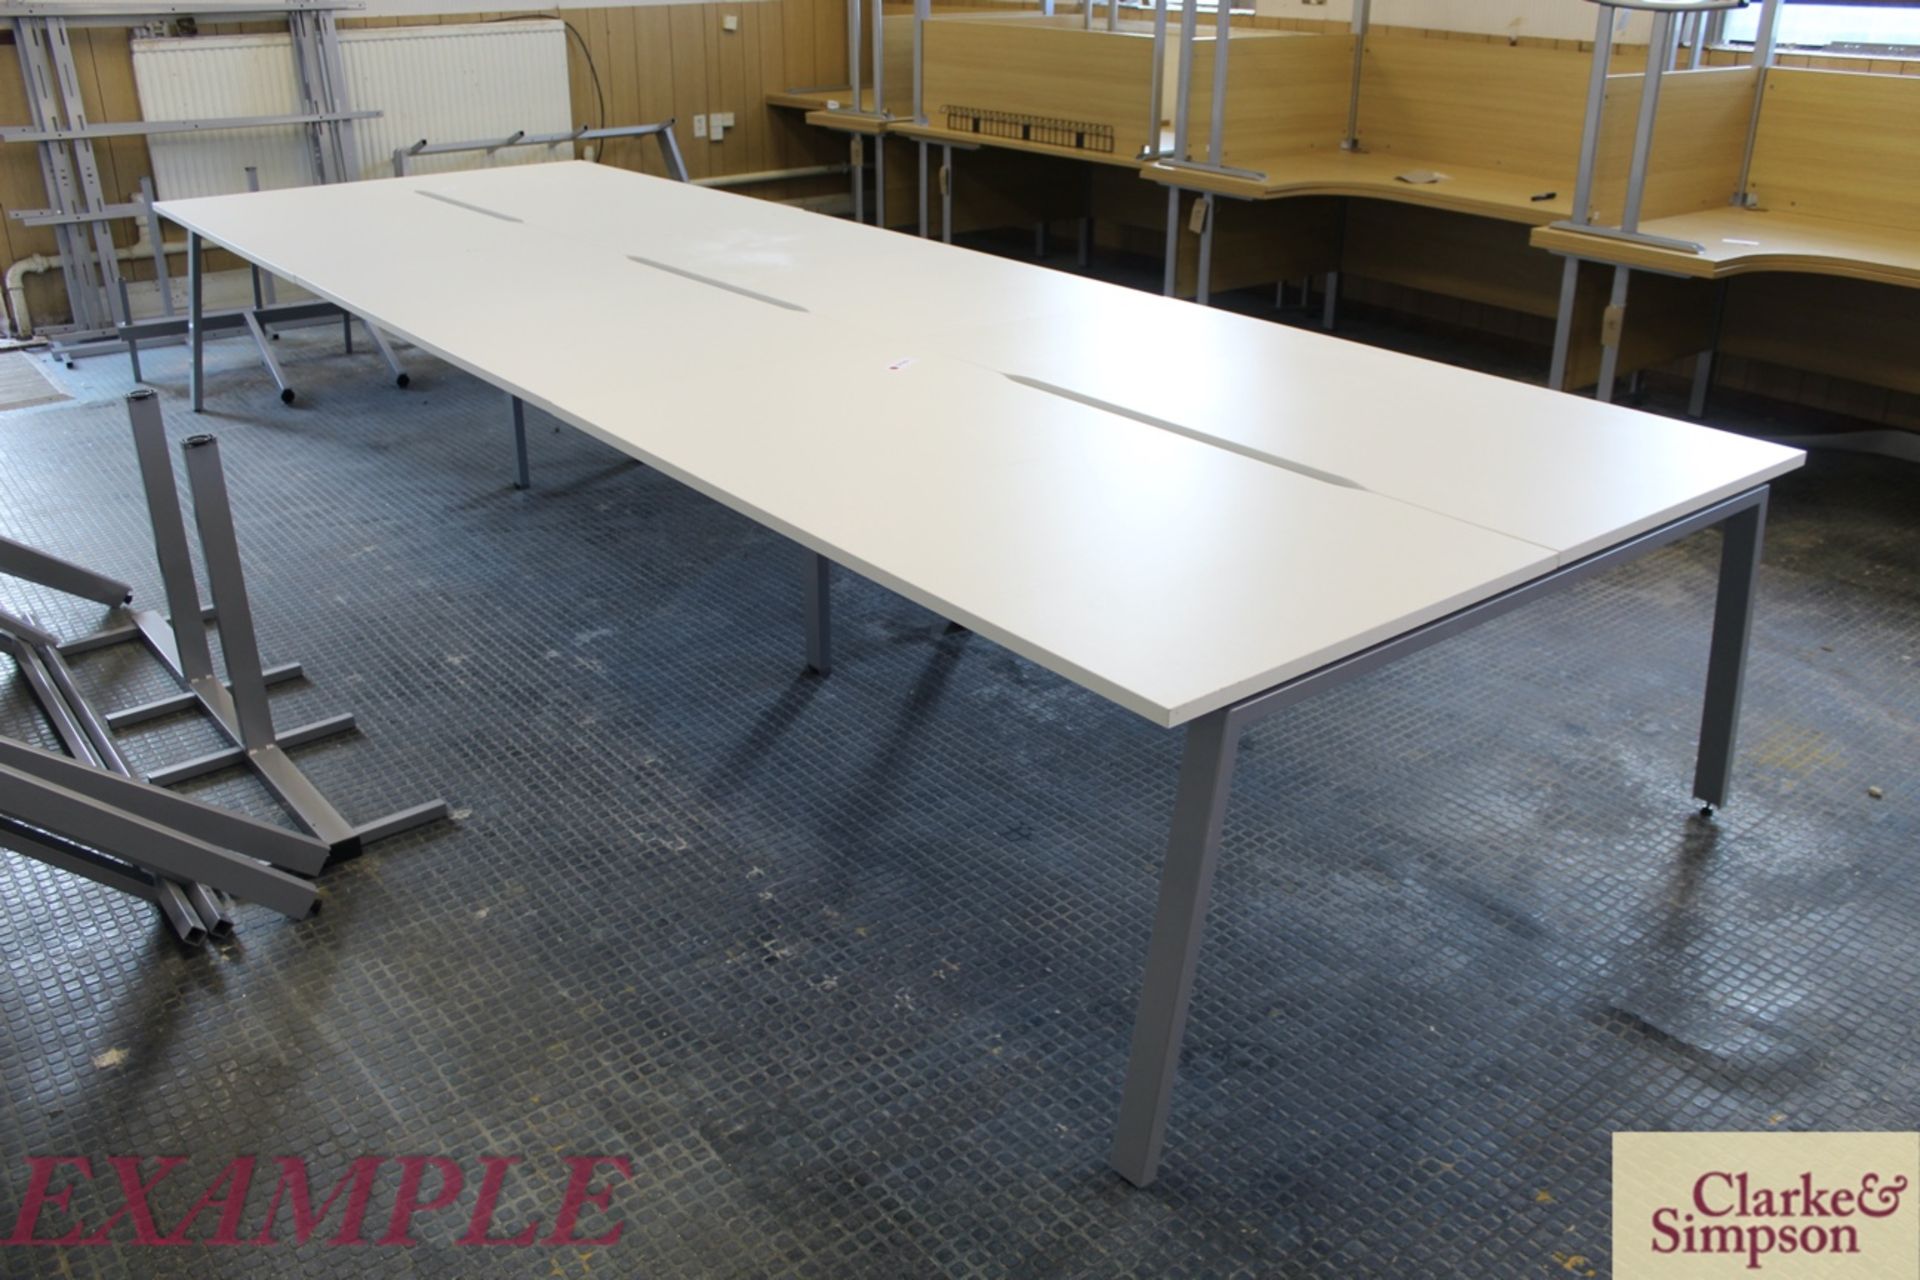 2.4m x 1.6m back-to-back sectional bench desk. Com - Image 4 of 11